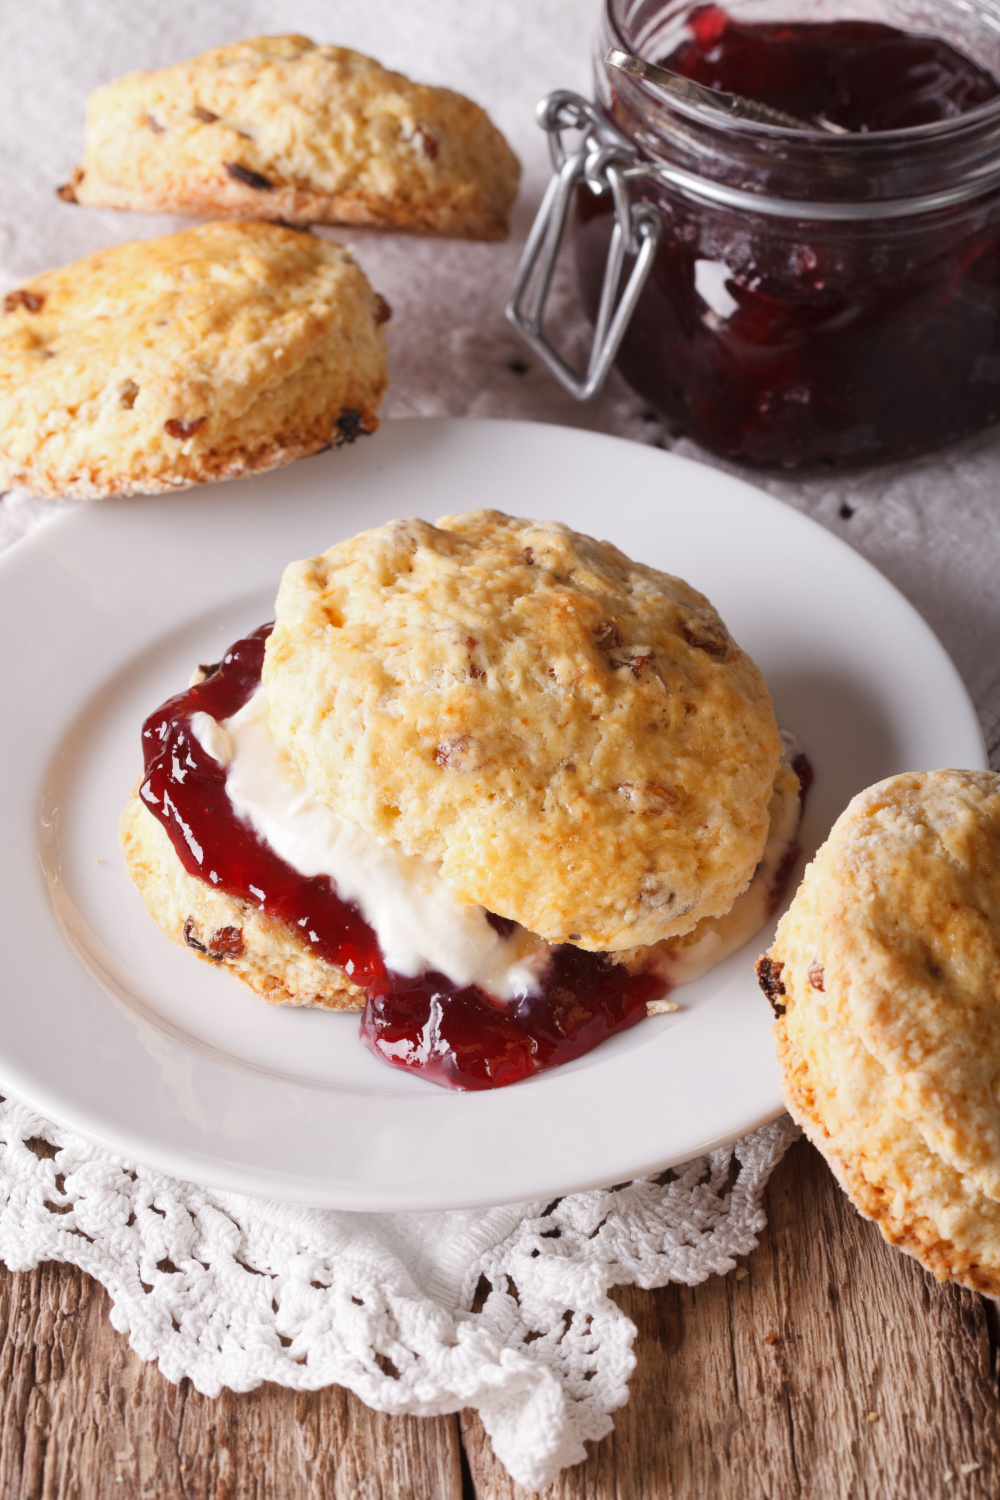 Buttermilk scones with red currant jam served on saucer